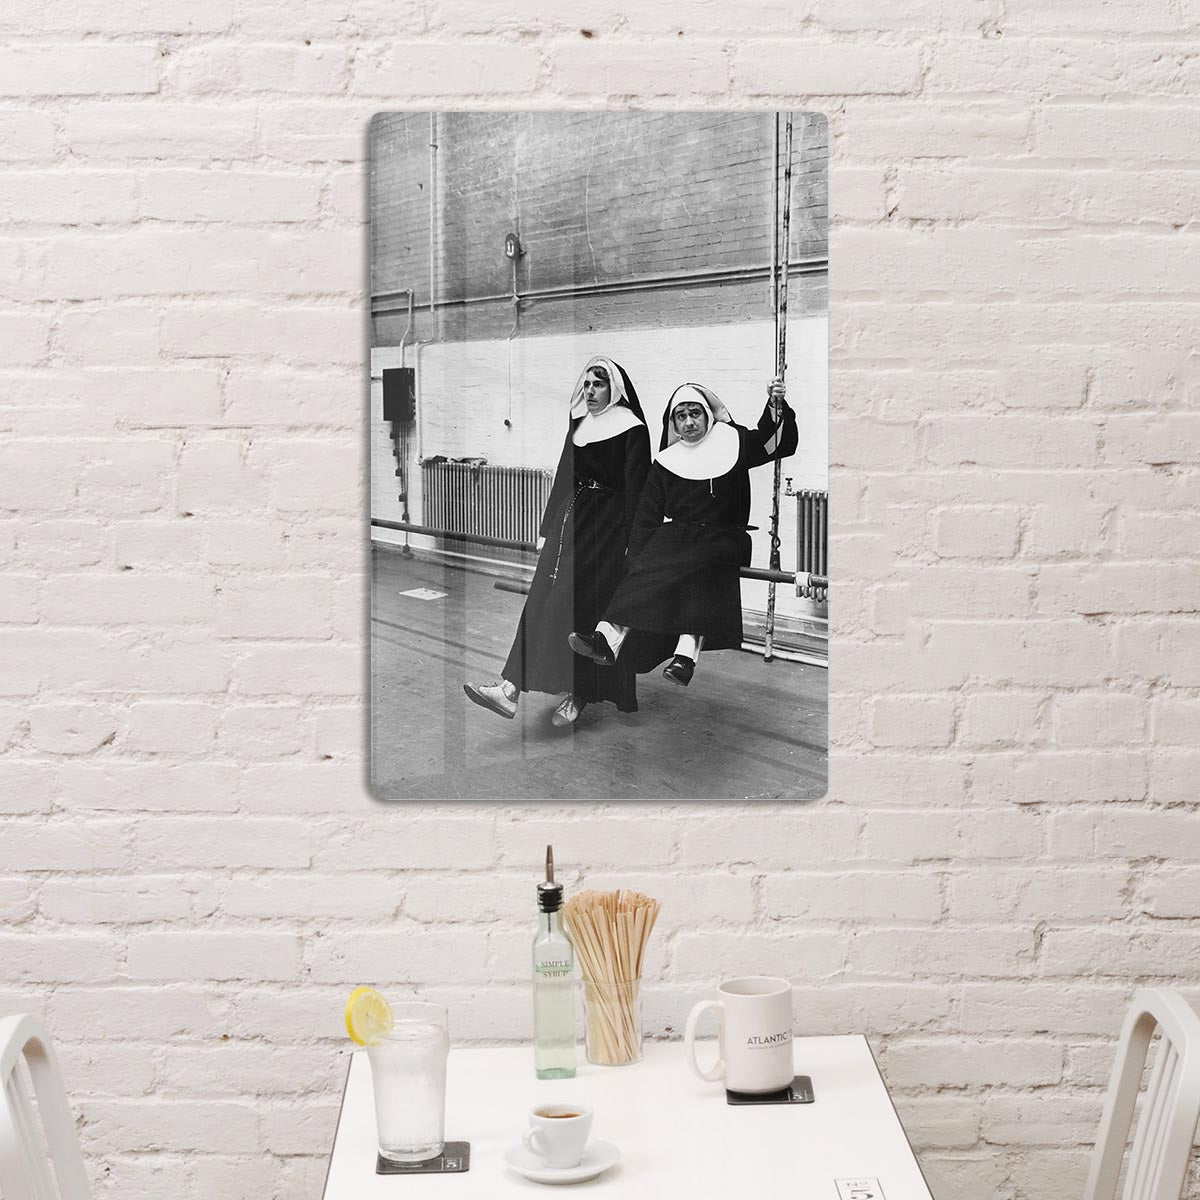 Peter Cook and Dudley Moore dressed as nuns HD Metal Print